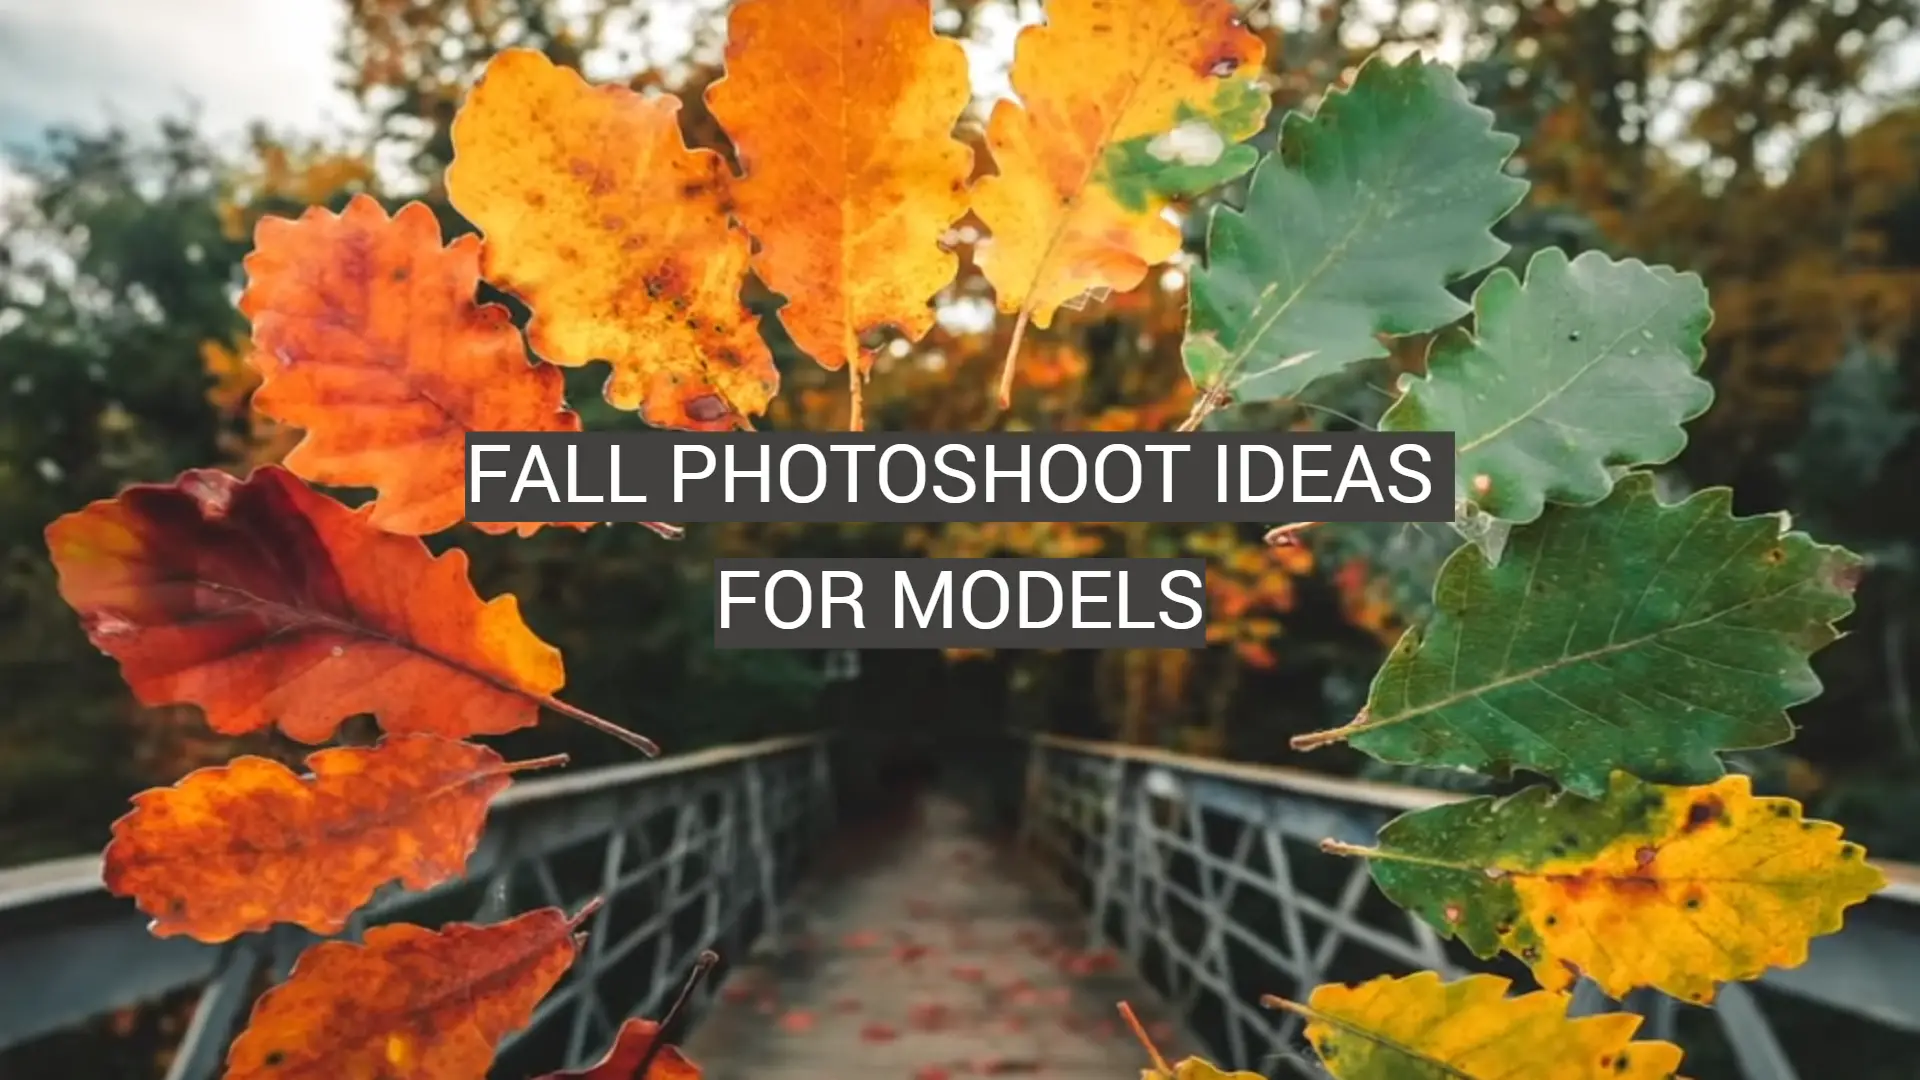 Fall Photoshoot Ideas for Models